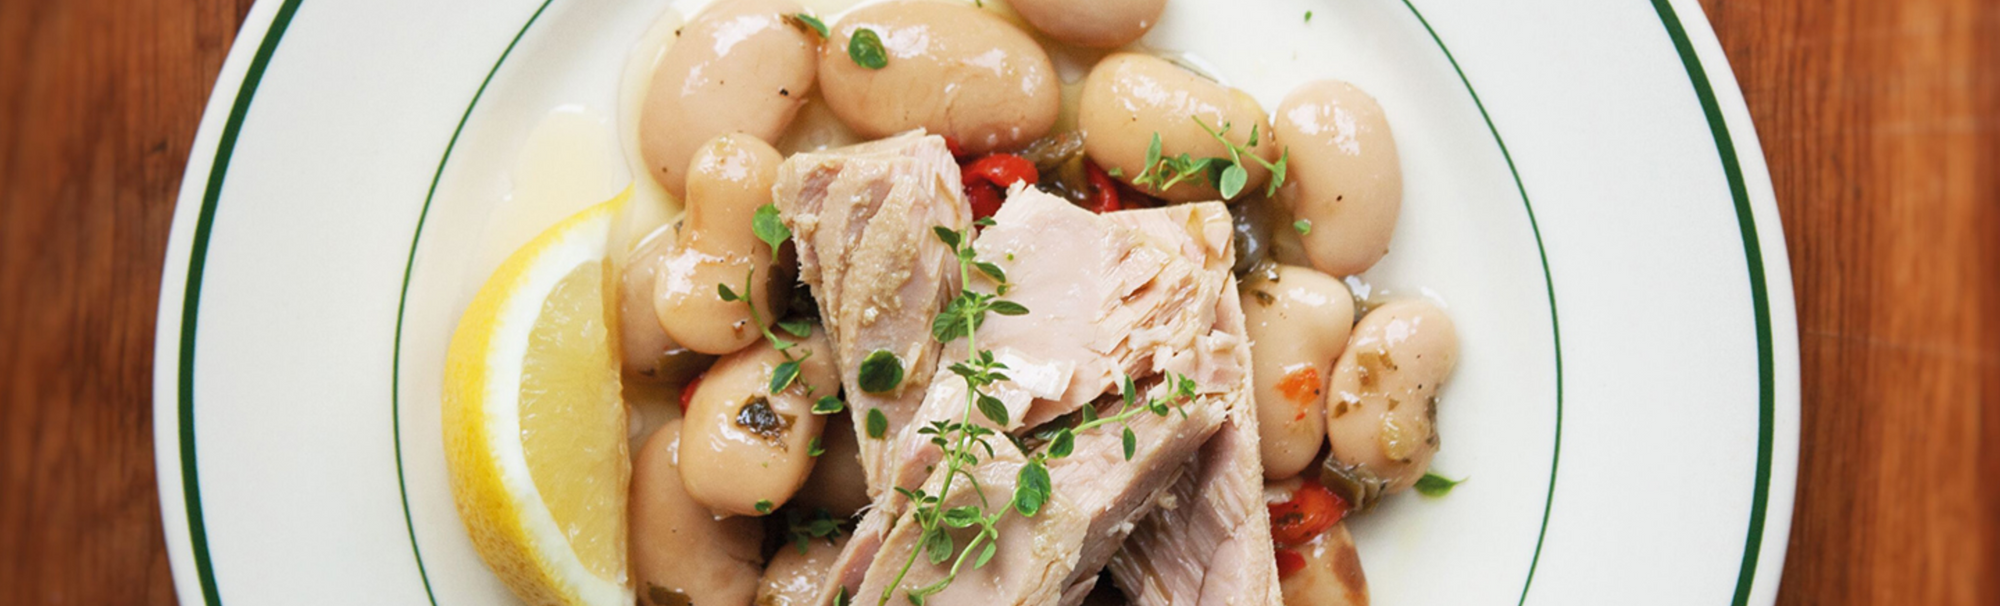 Tuscan-Style Gigandes Beans with Tuna